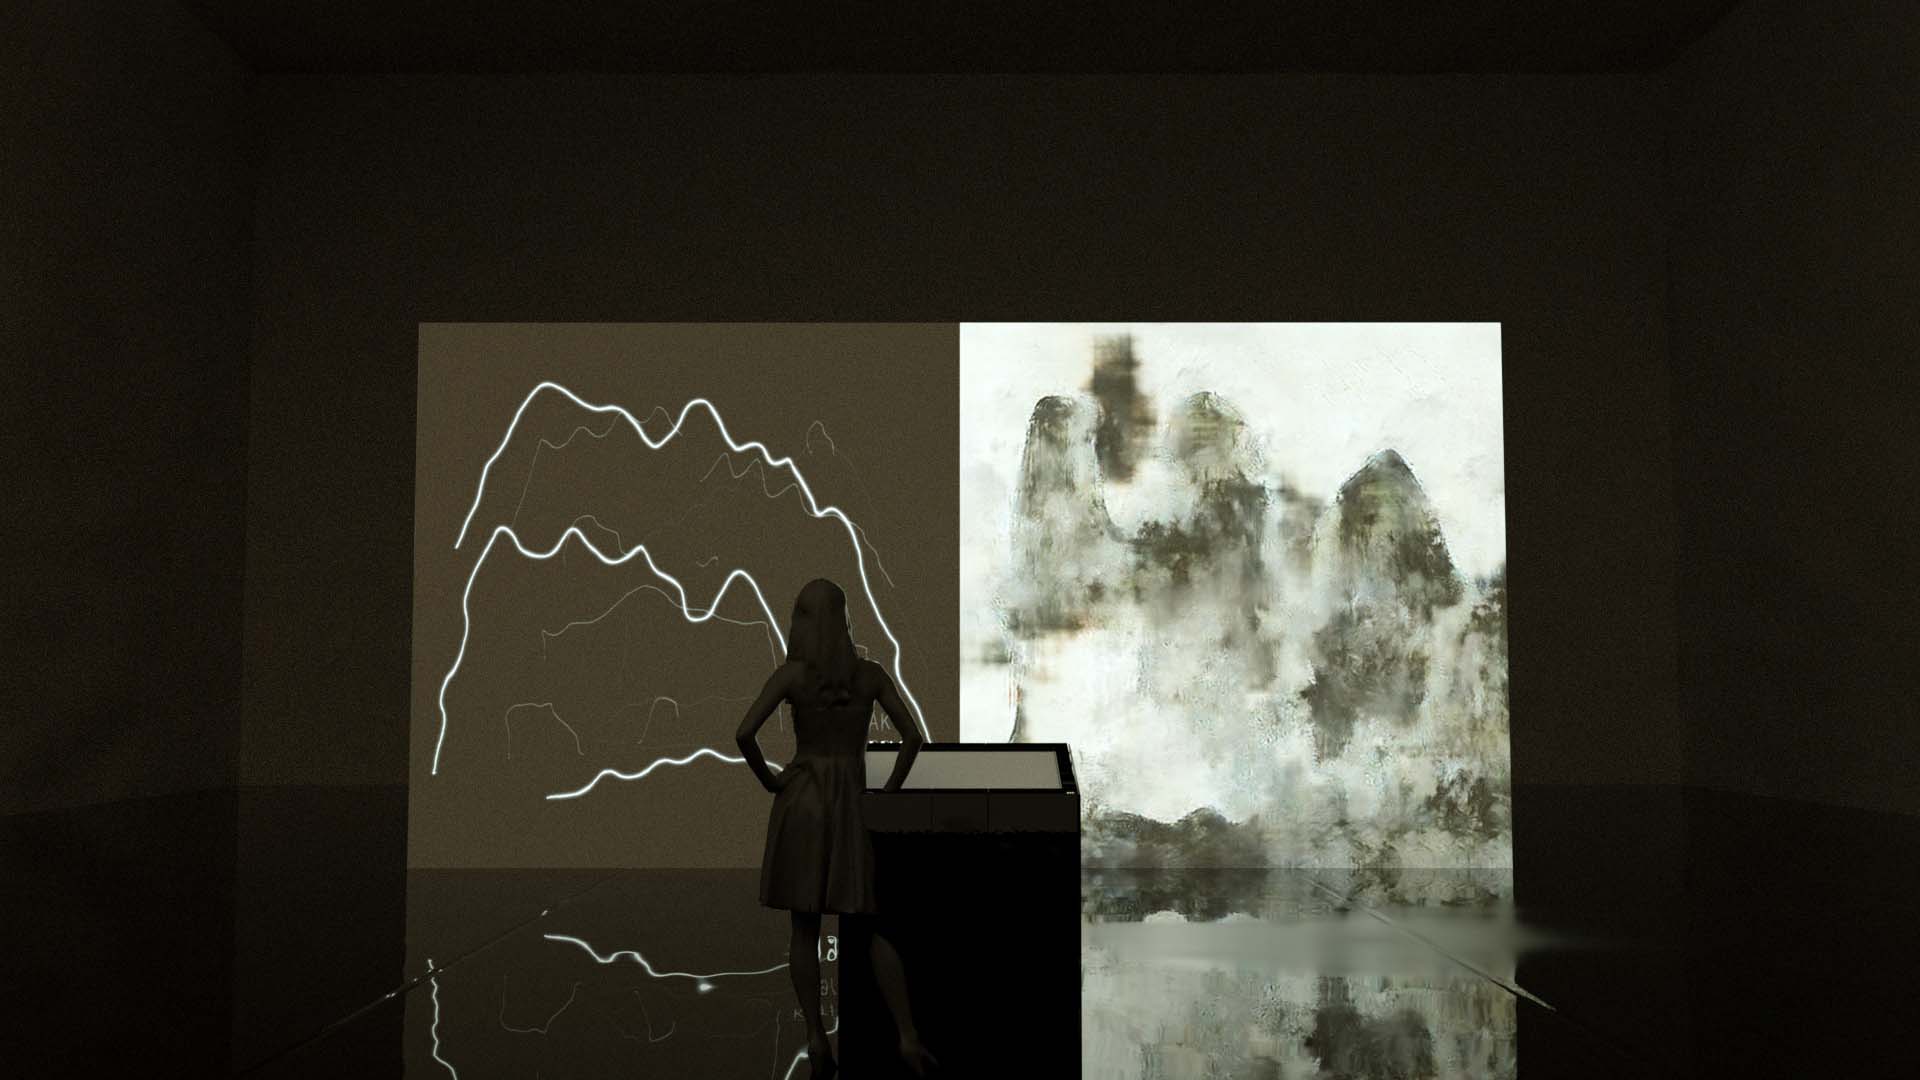 Dino Fung, XRT, Mountain & Water, 2019, Projection, 8000cm x 4000cm